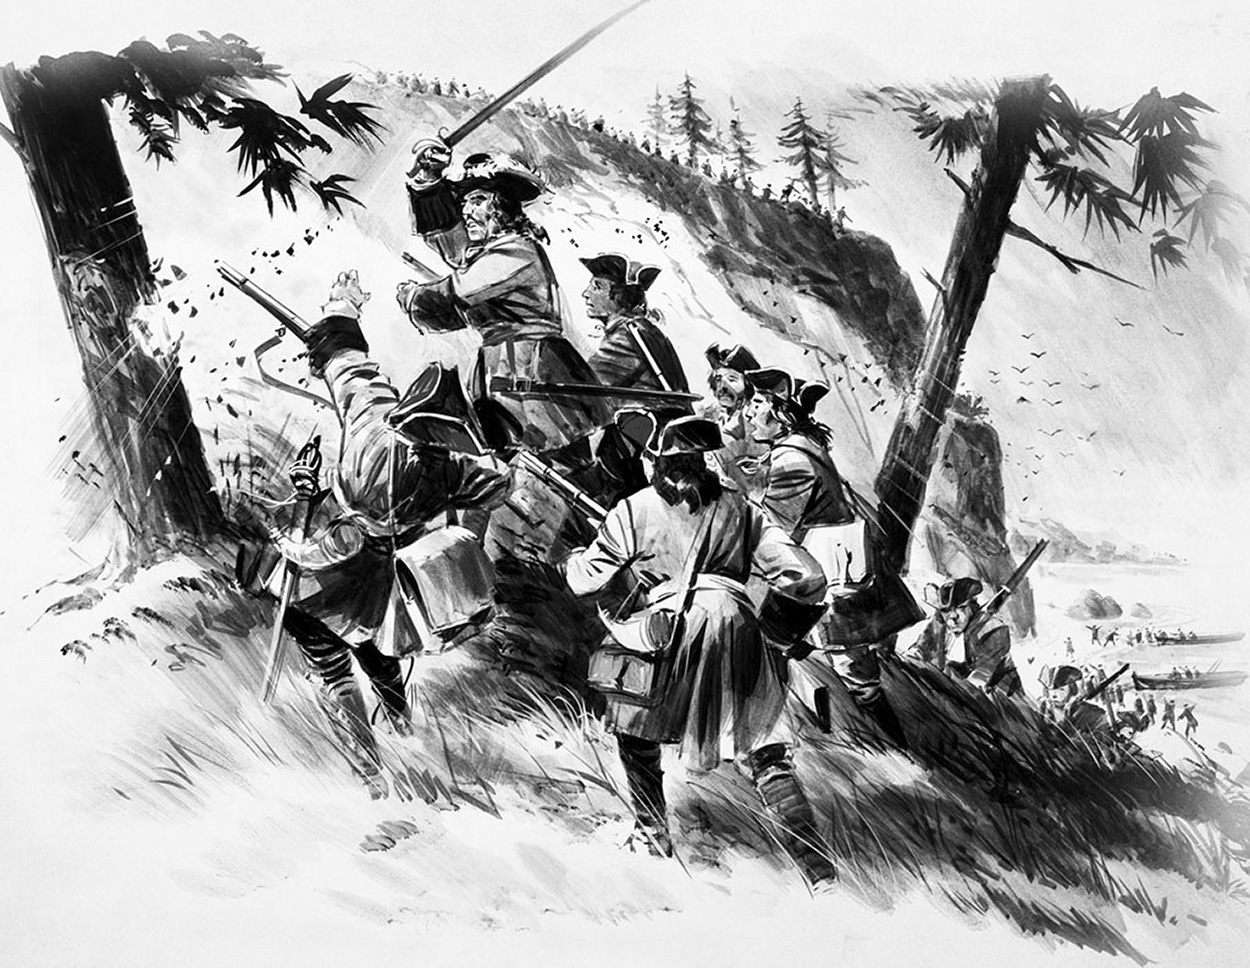 French troops storming Little Belle were faced with wooden cut-out soldiers (Original) art by Bill Lacey Art at The Illustration Art Gallery